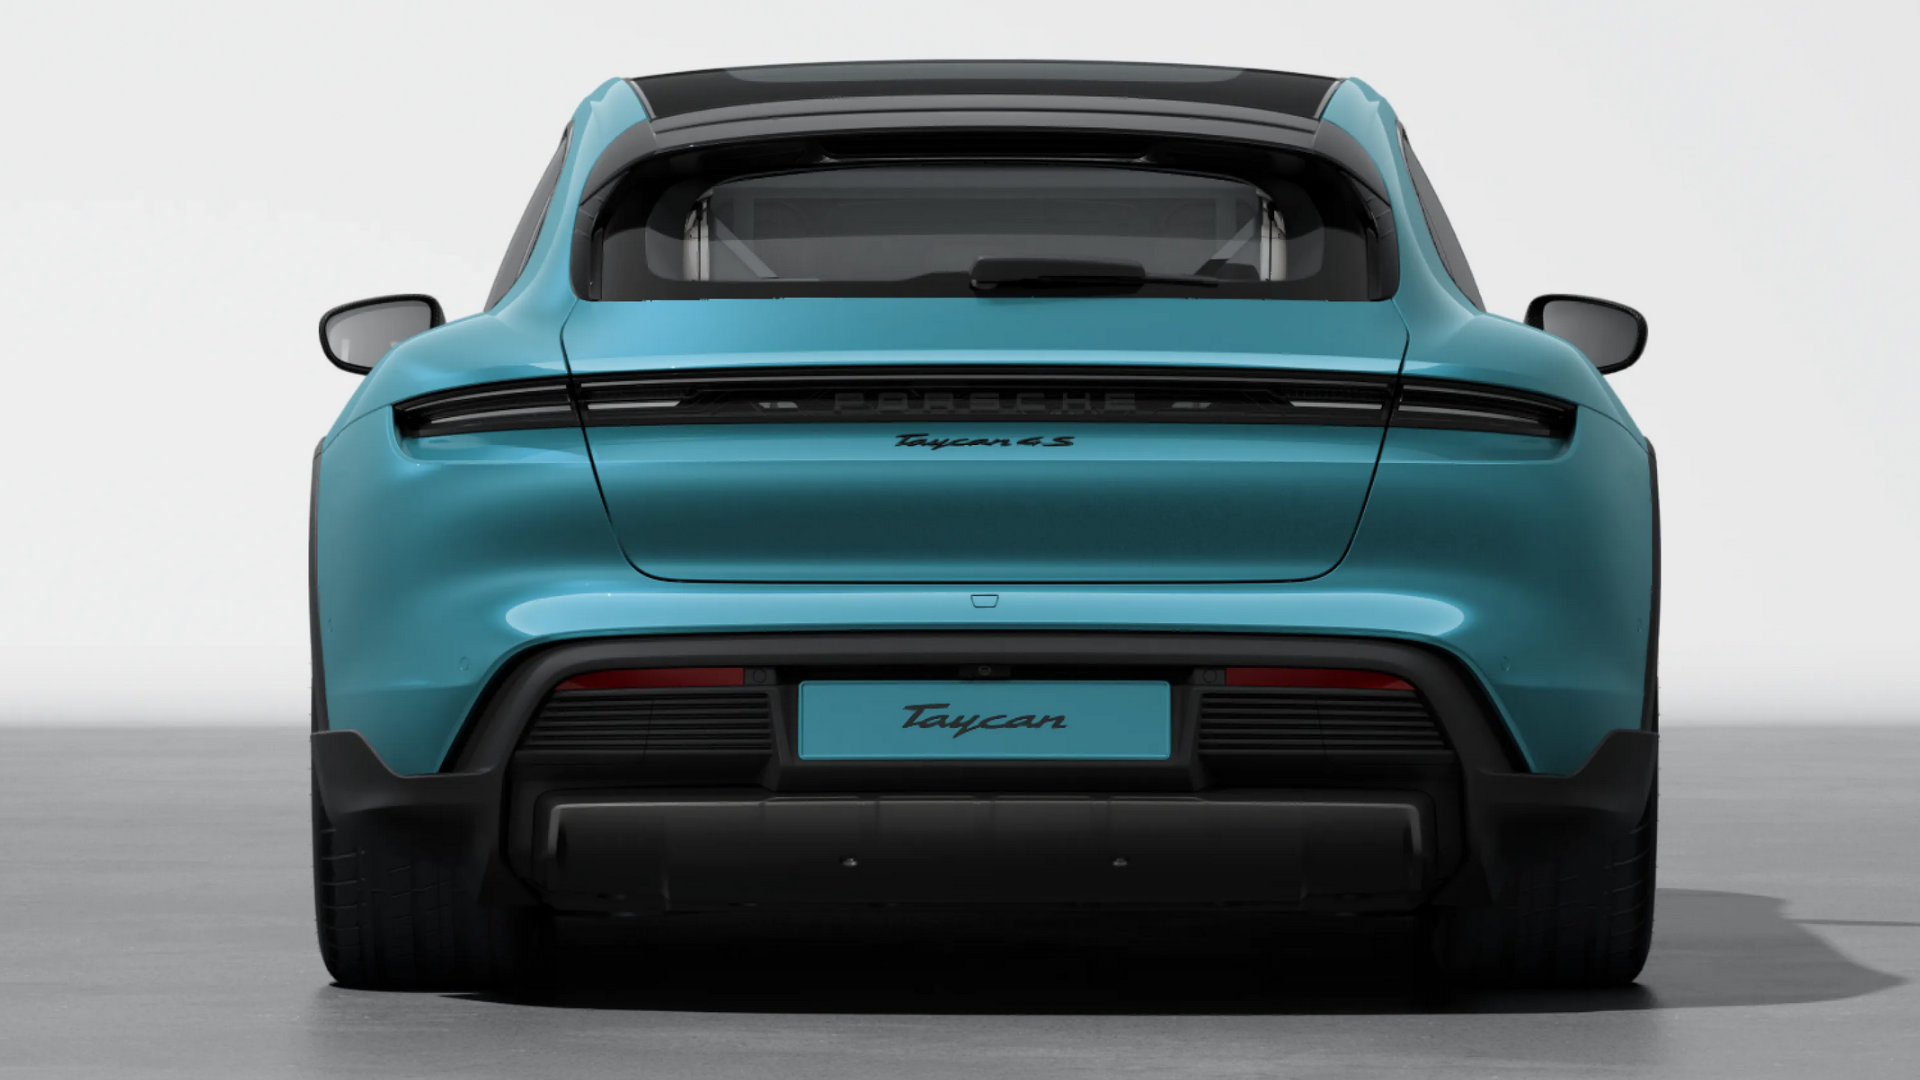 rear view of green/blue car